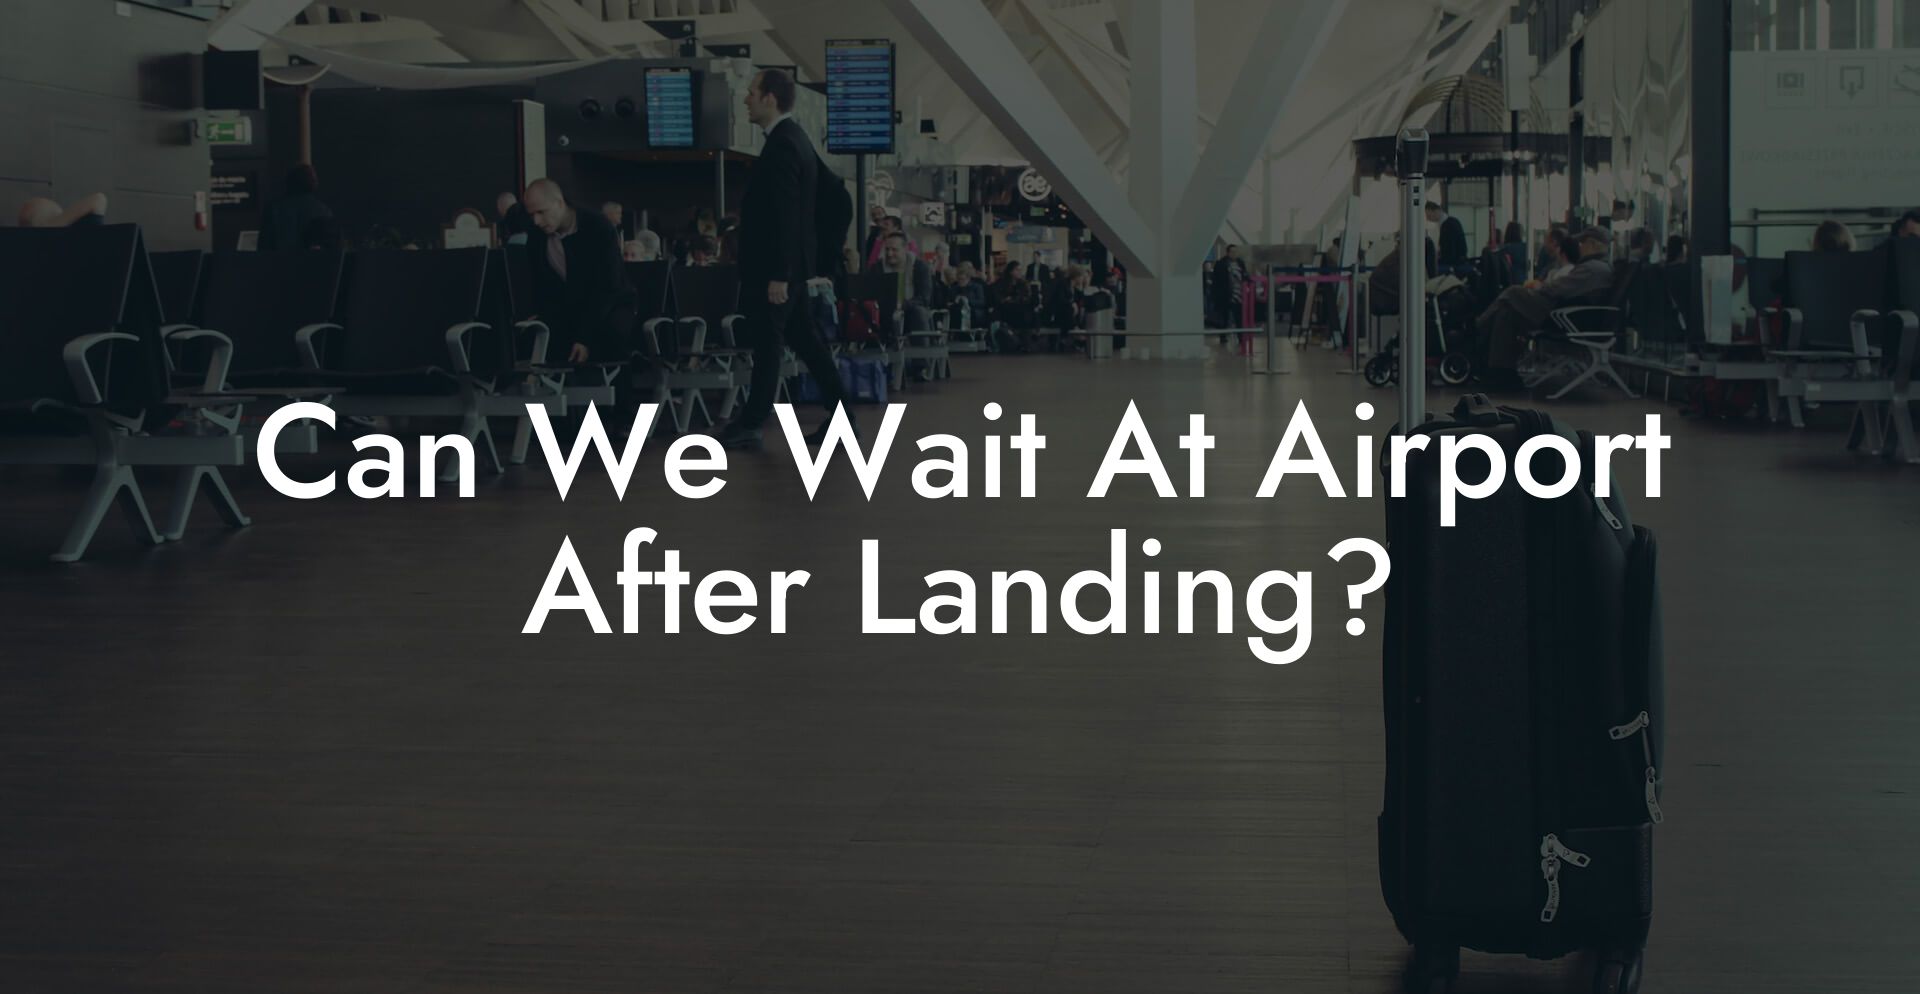 Can We Wait At Airport After Landing?